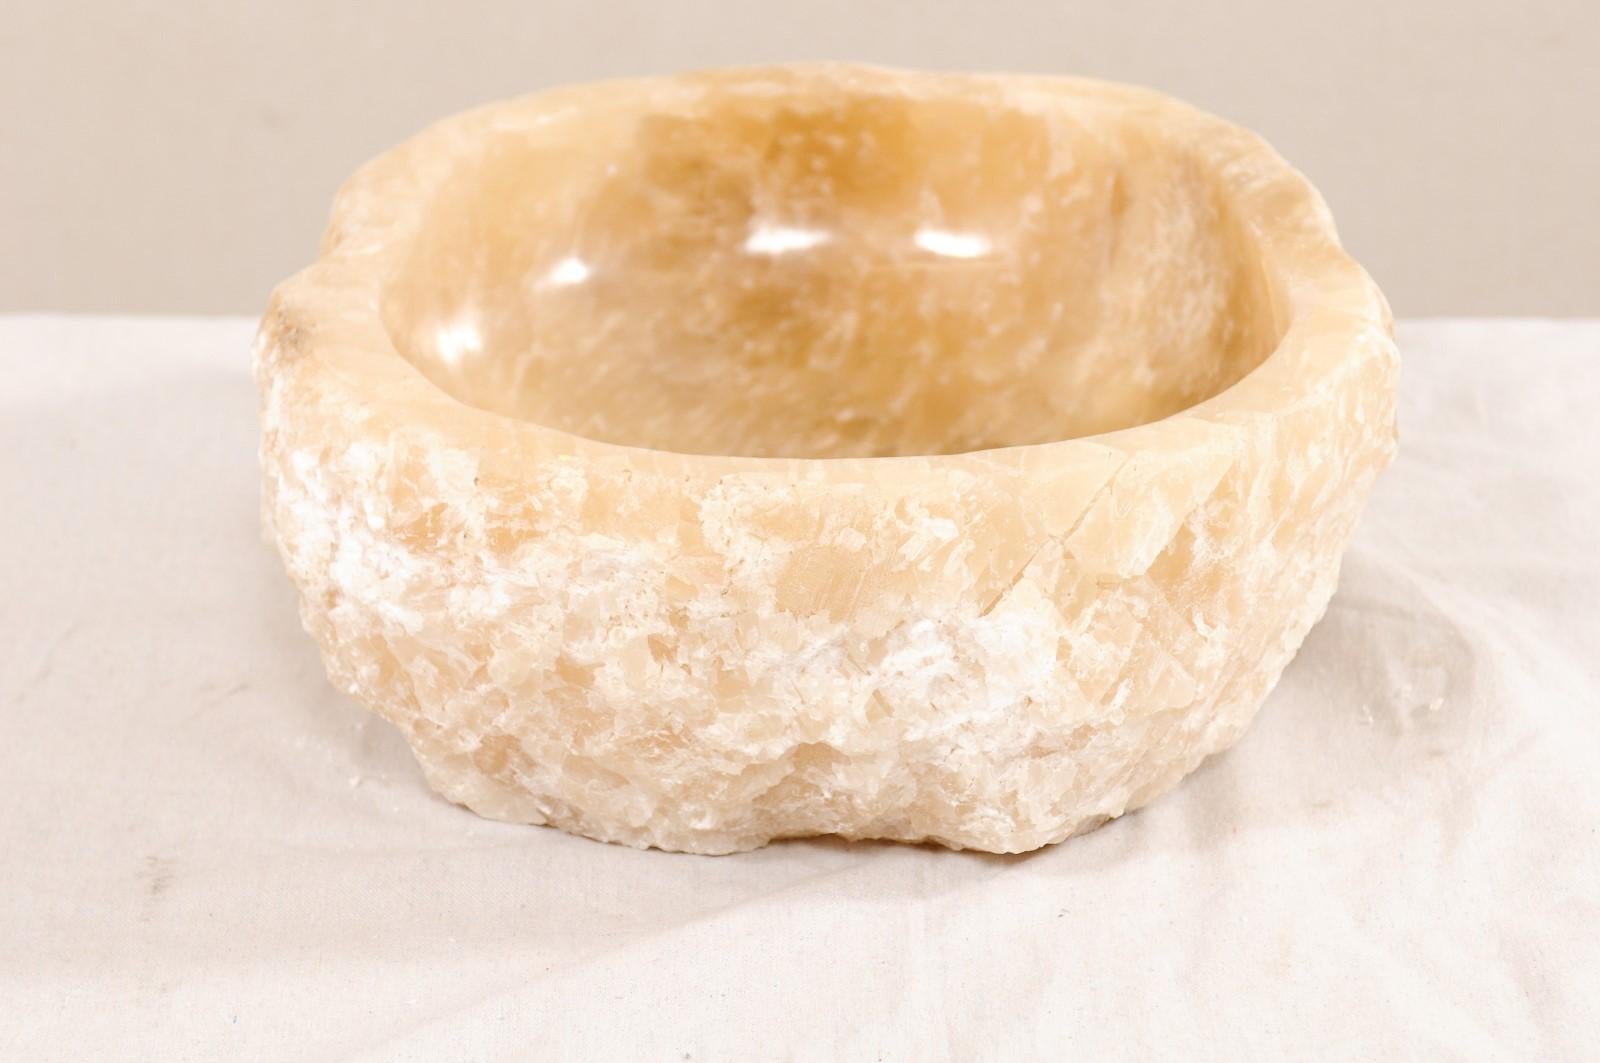 Carved Onyx Rock Sink Basin in Cream Color 2